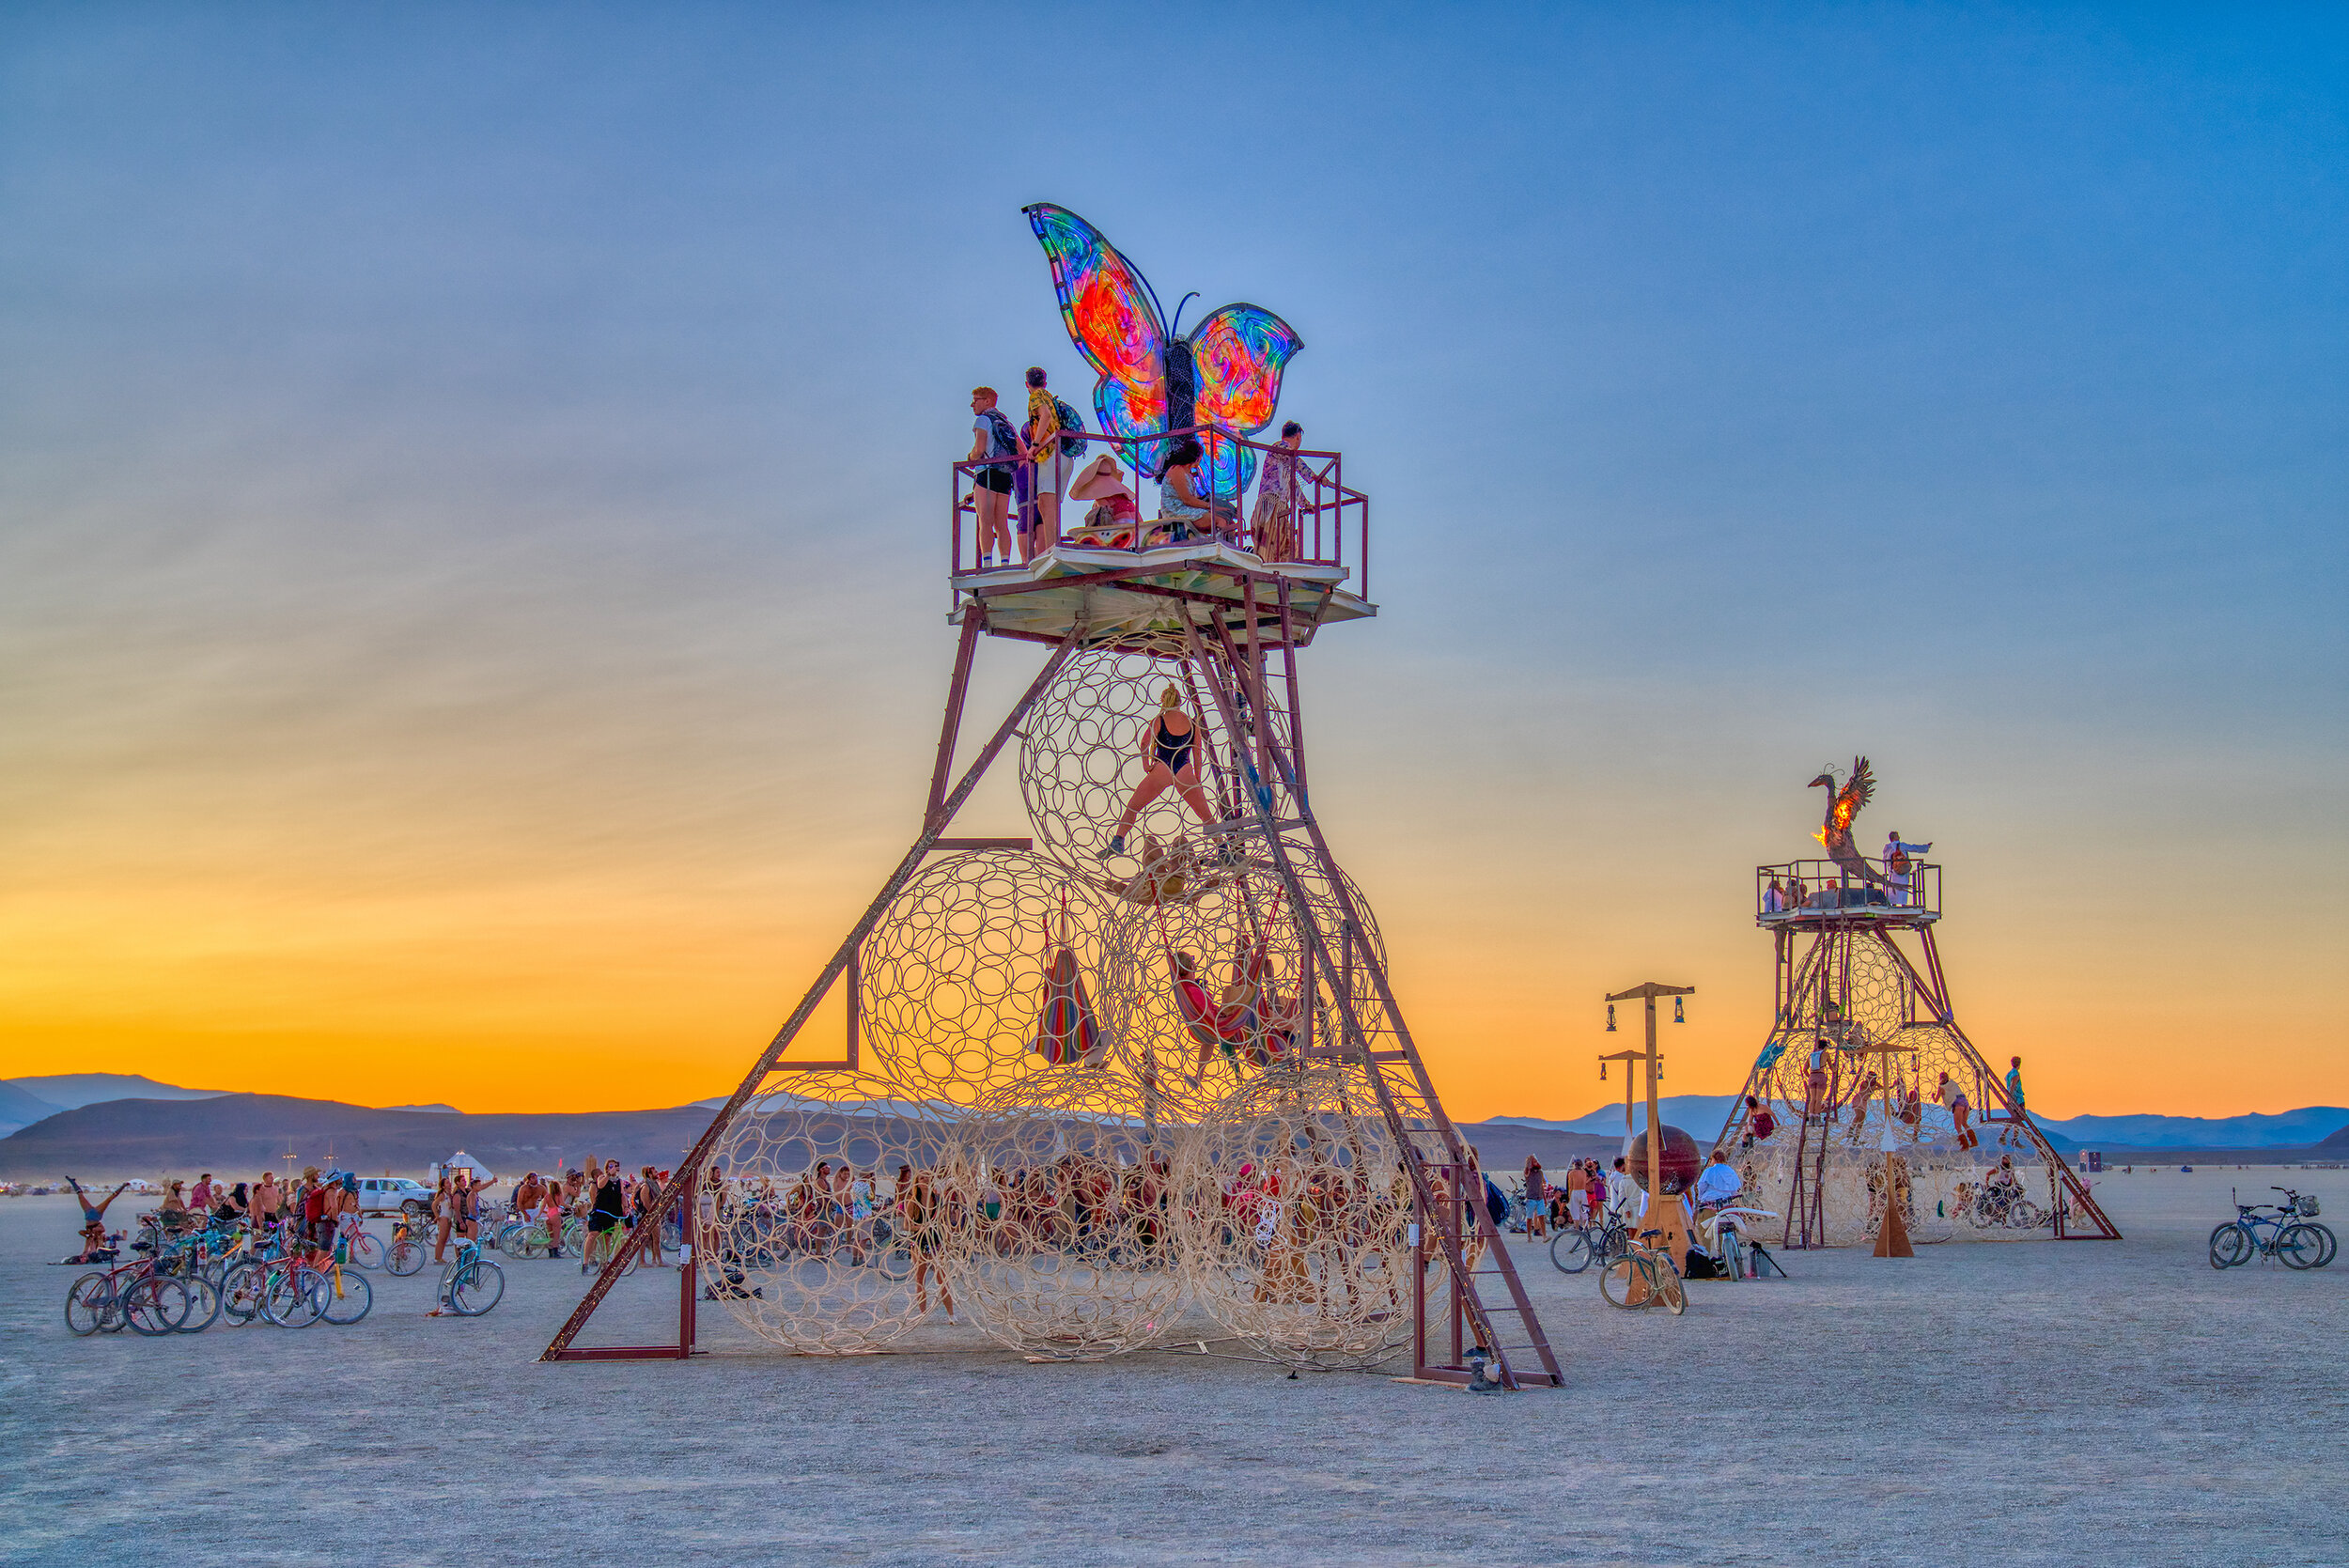 Burning Man 2019 - The Butterfly and the Pheonix